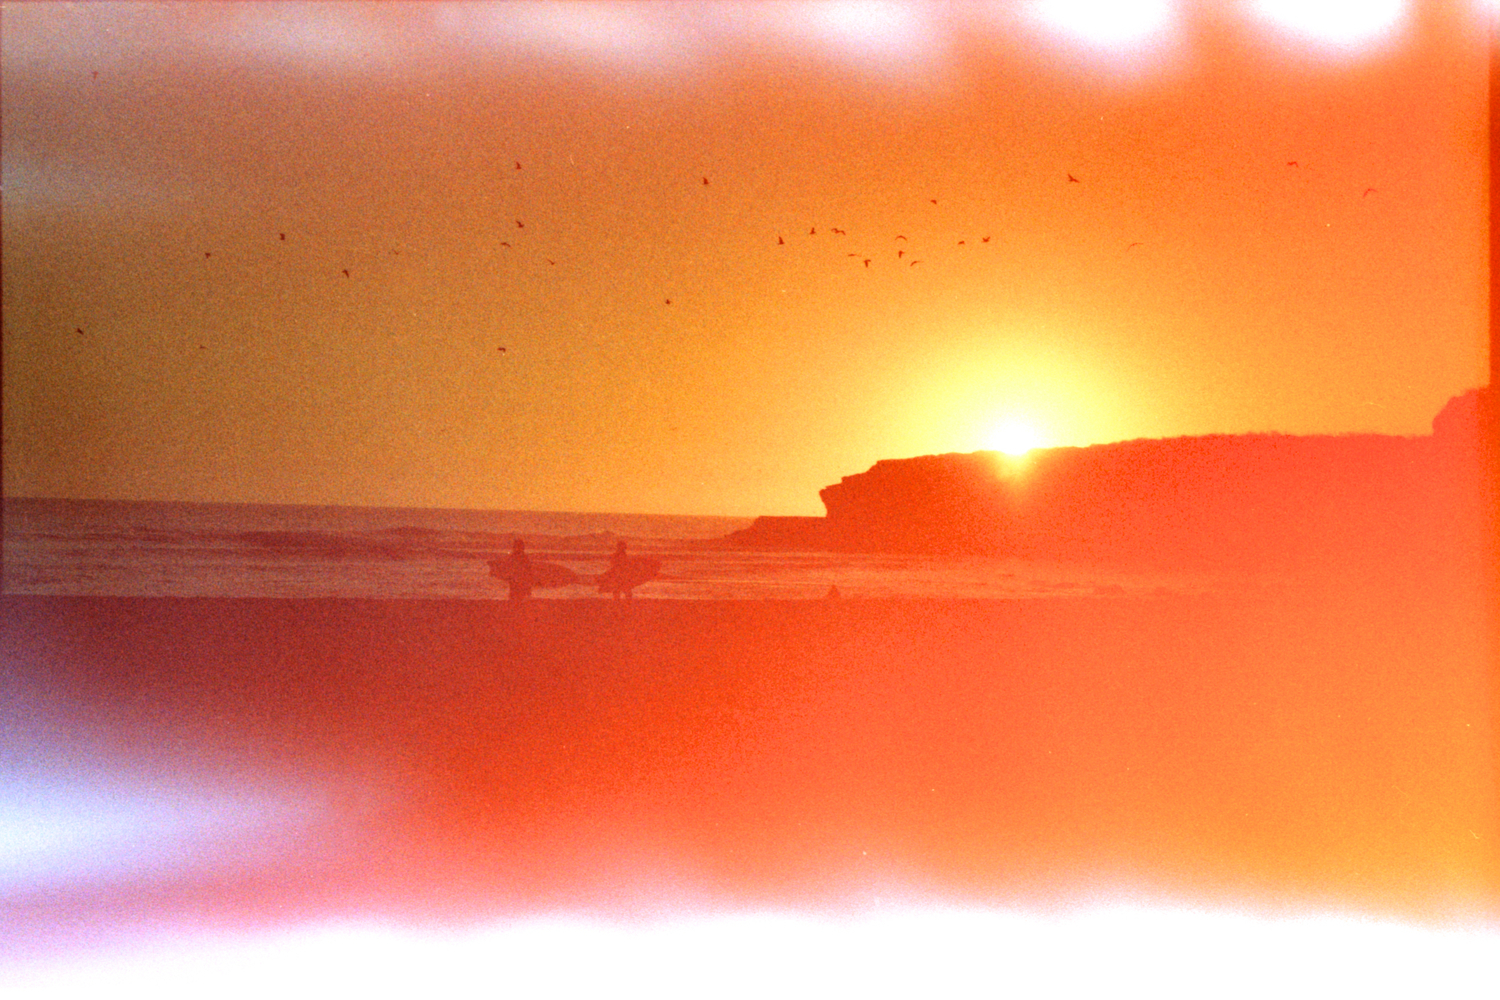 "A weekend day trying to escape the crowds of Santa Cruz…" Shot on Nikon FM2, cross processed 35mm film